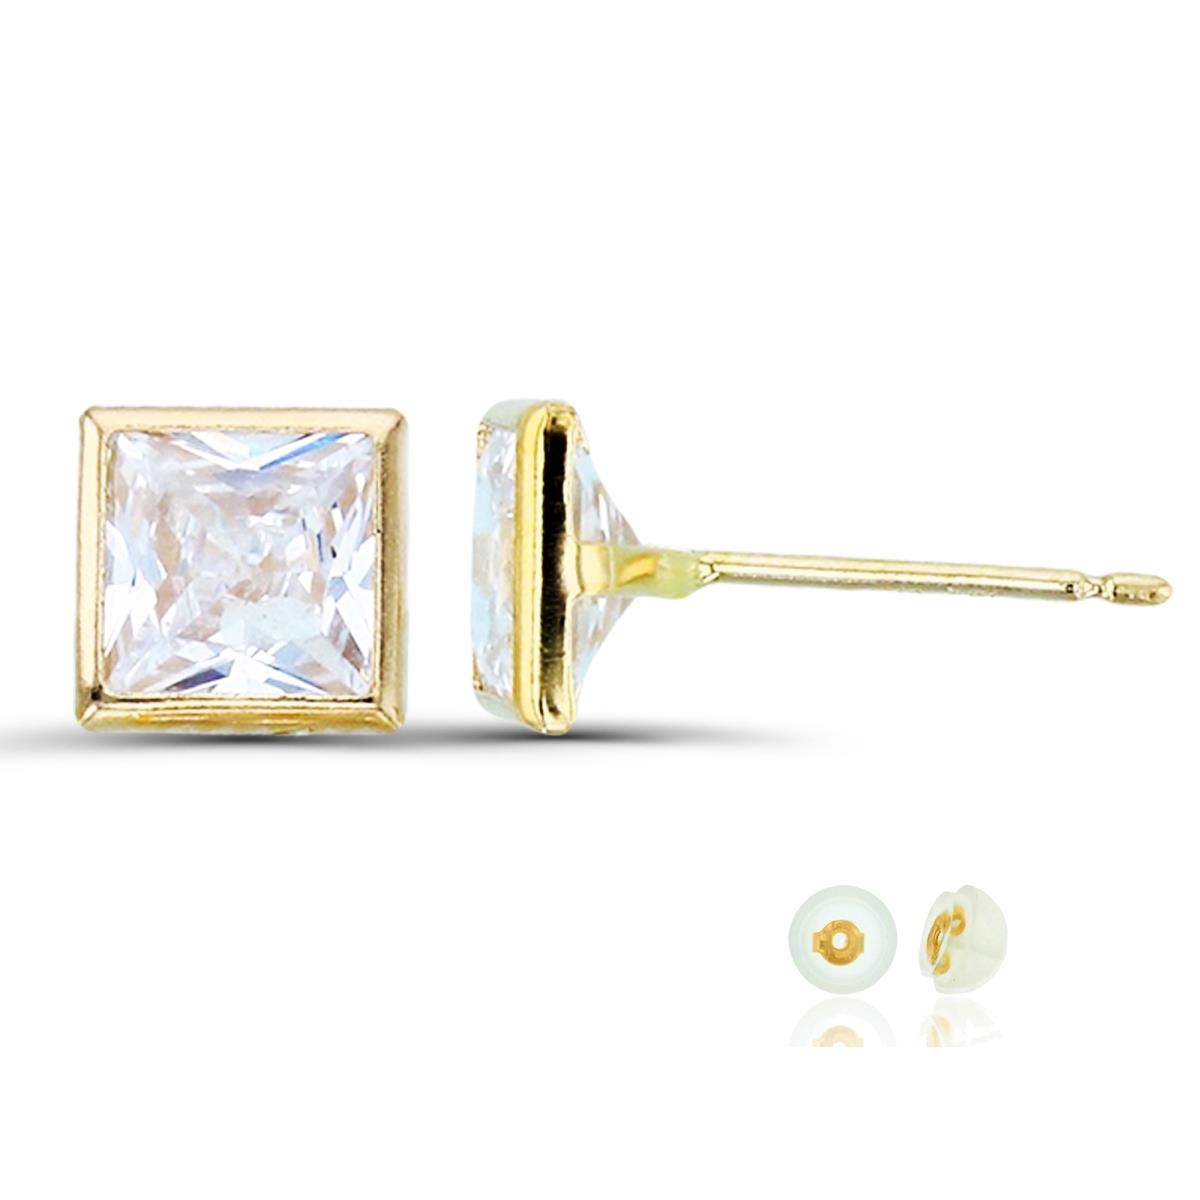 14K Yellow Gold 5mm Square CZ Bezel Stud Earring with Silicone Back